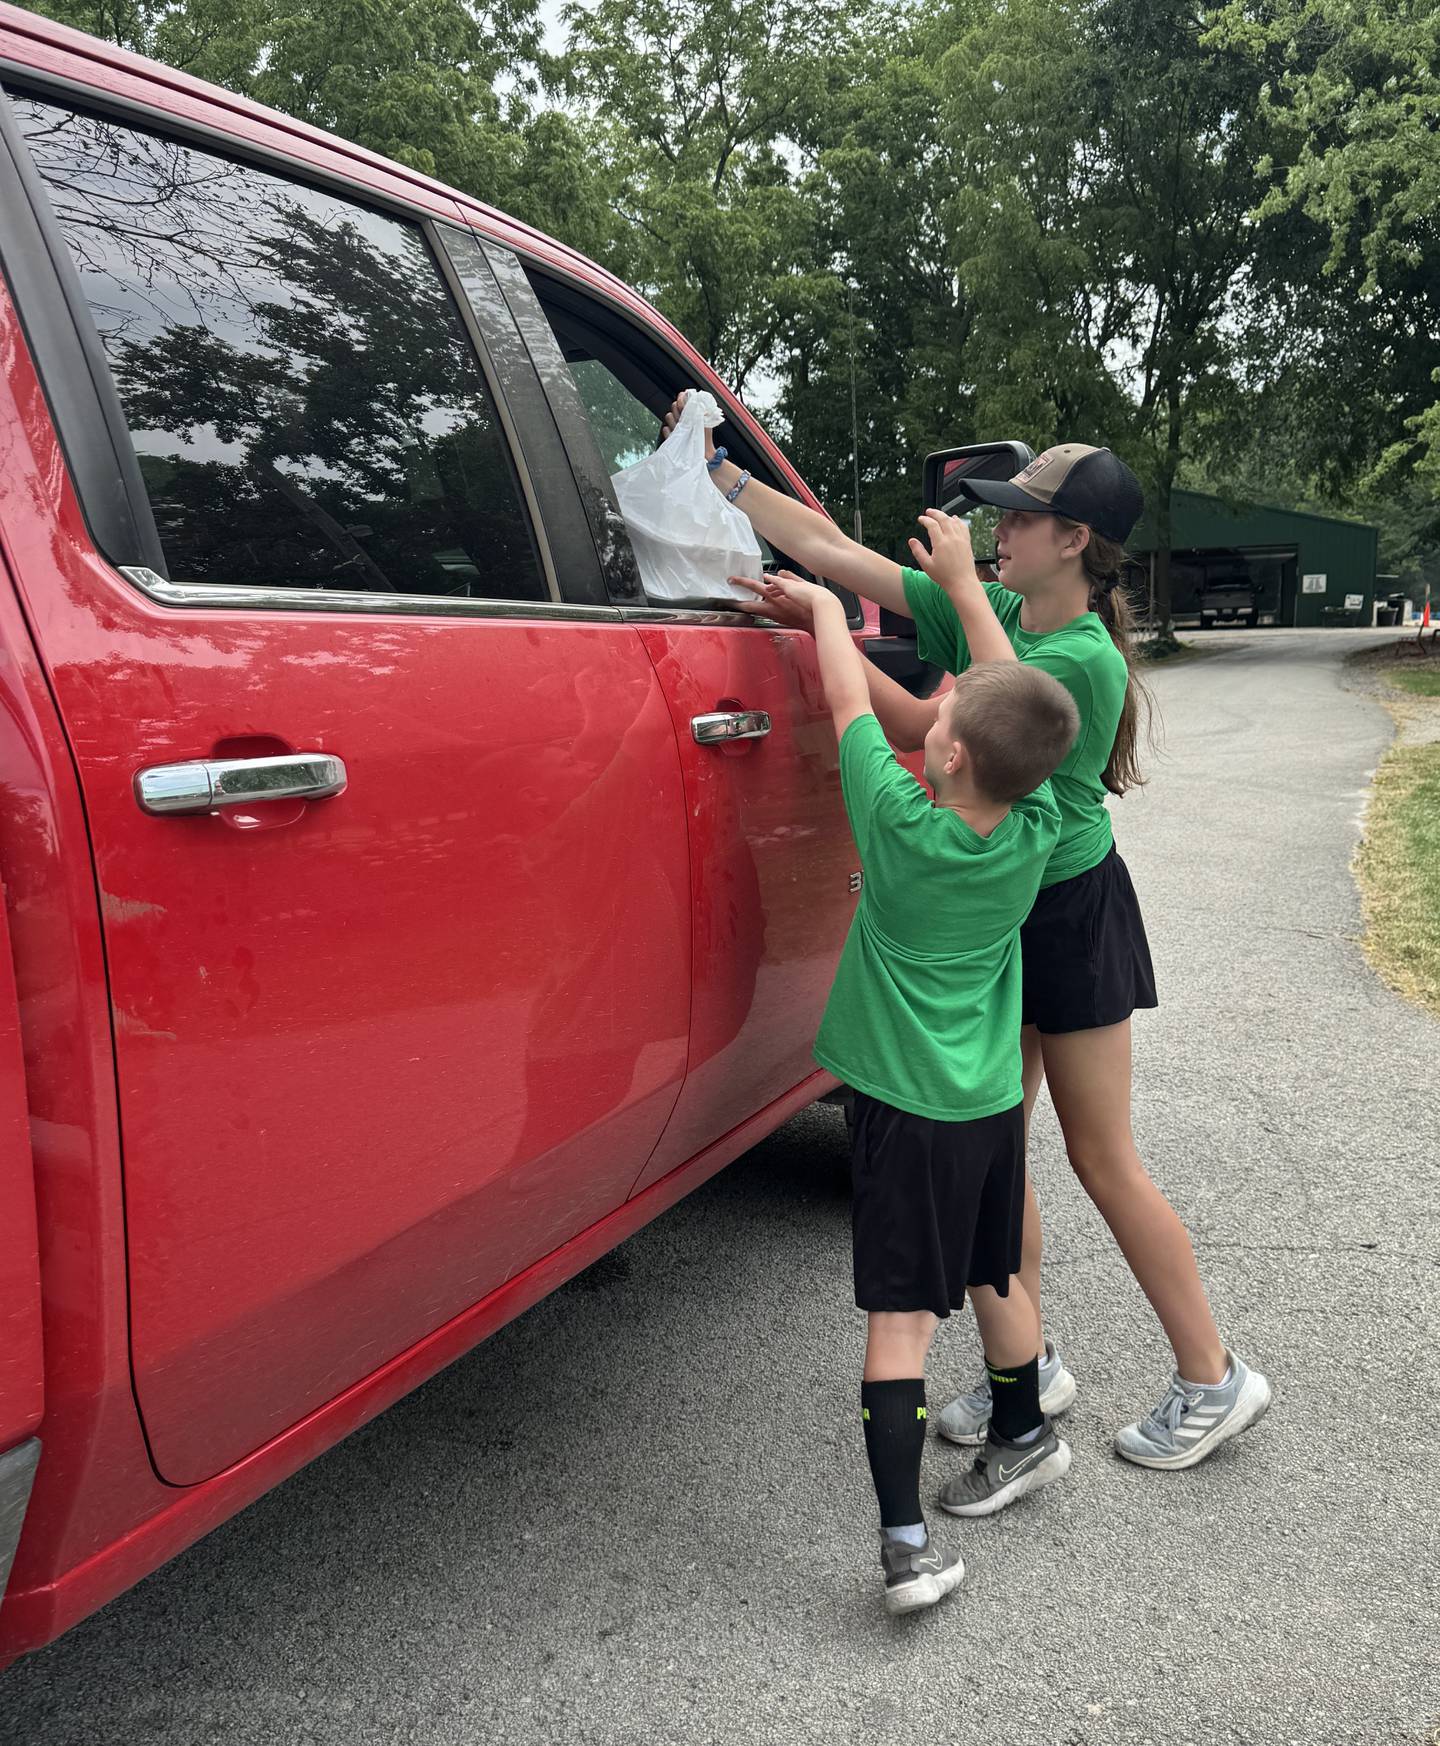 4-H youth deliver a meal to a car during the Illinois Extension and Kendall County 4-H Foundation’s annual pork chop dinner fundraiser on Thursday, June 20.